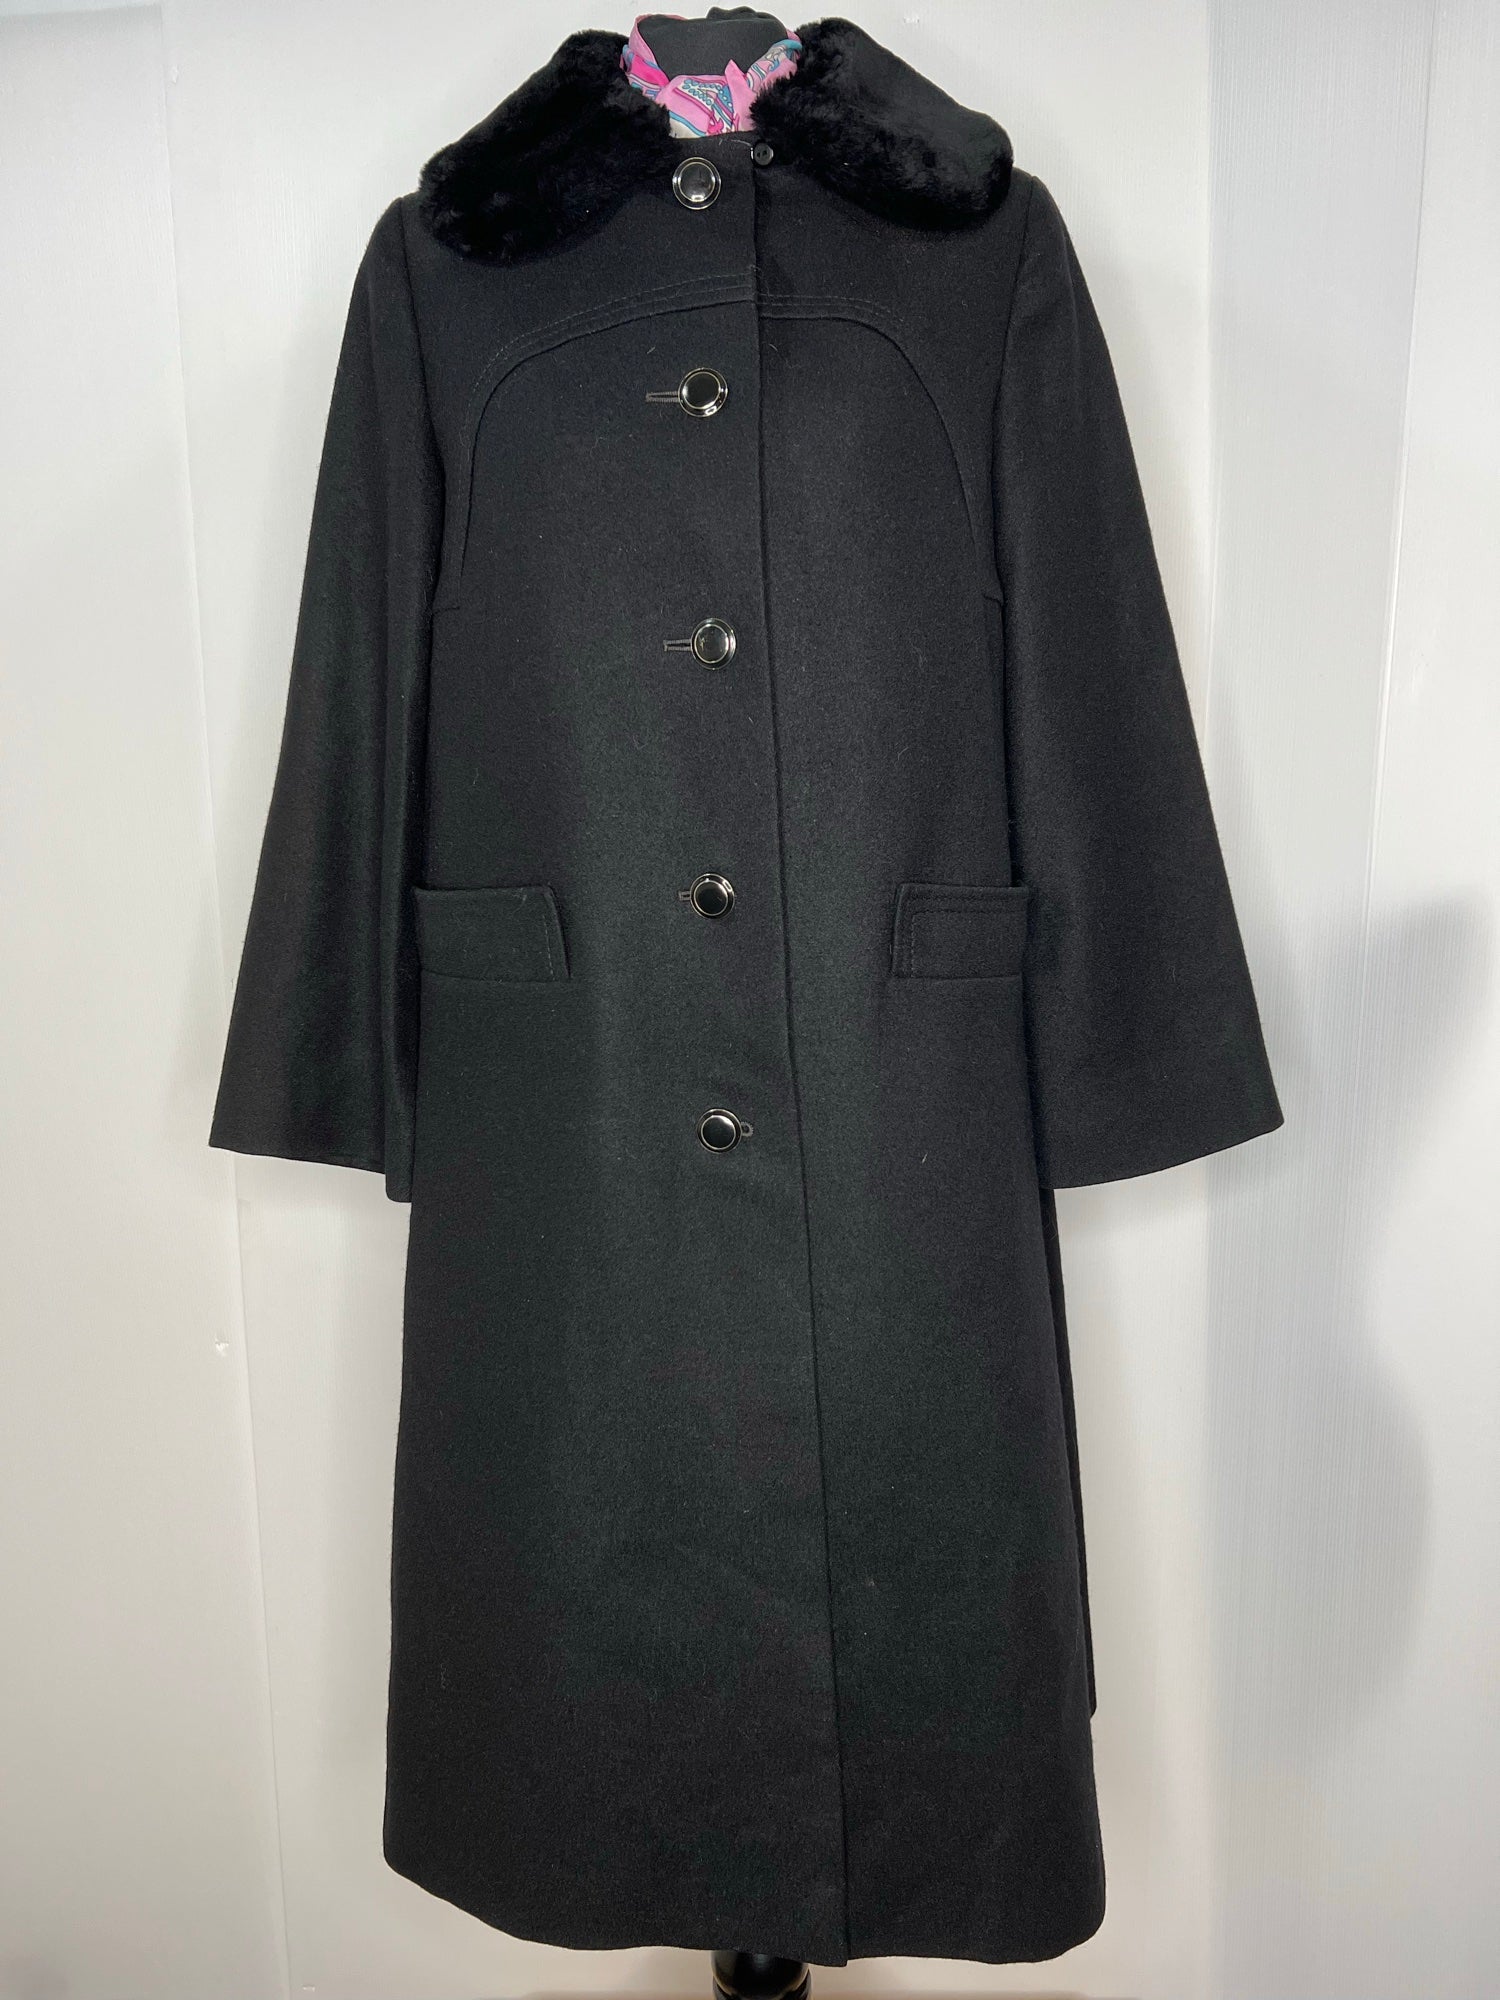 Vintage 1960s Coat with Sheepskin Collar in Black by Windsmoor - Size ...